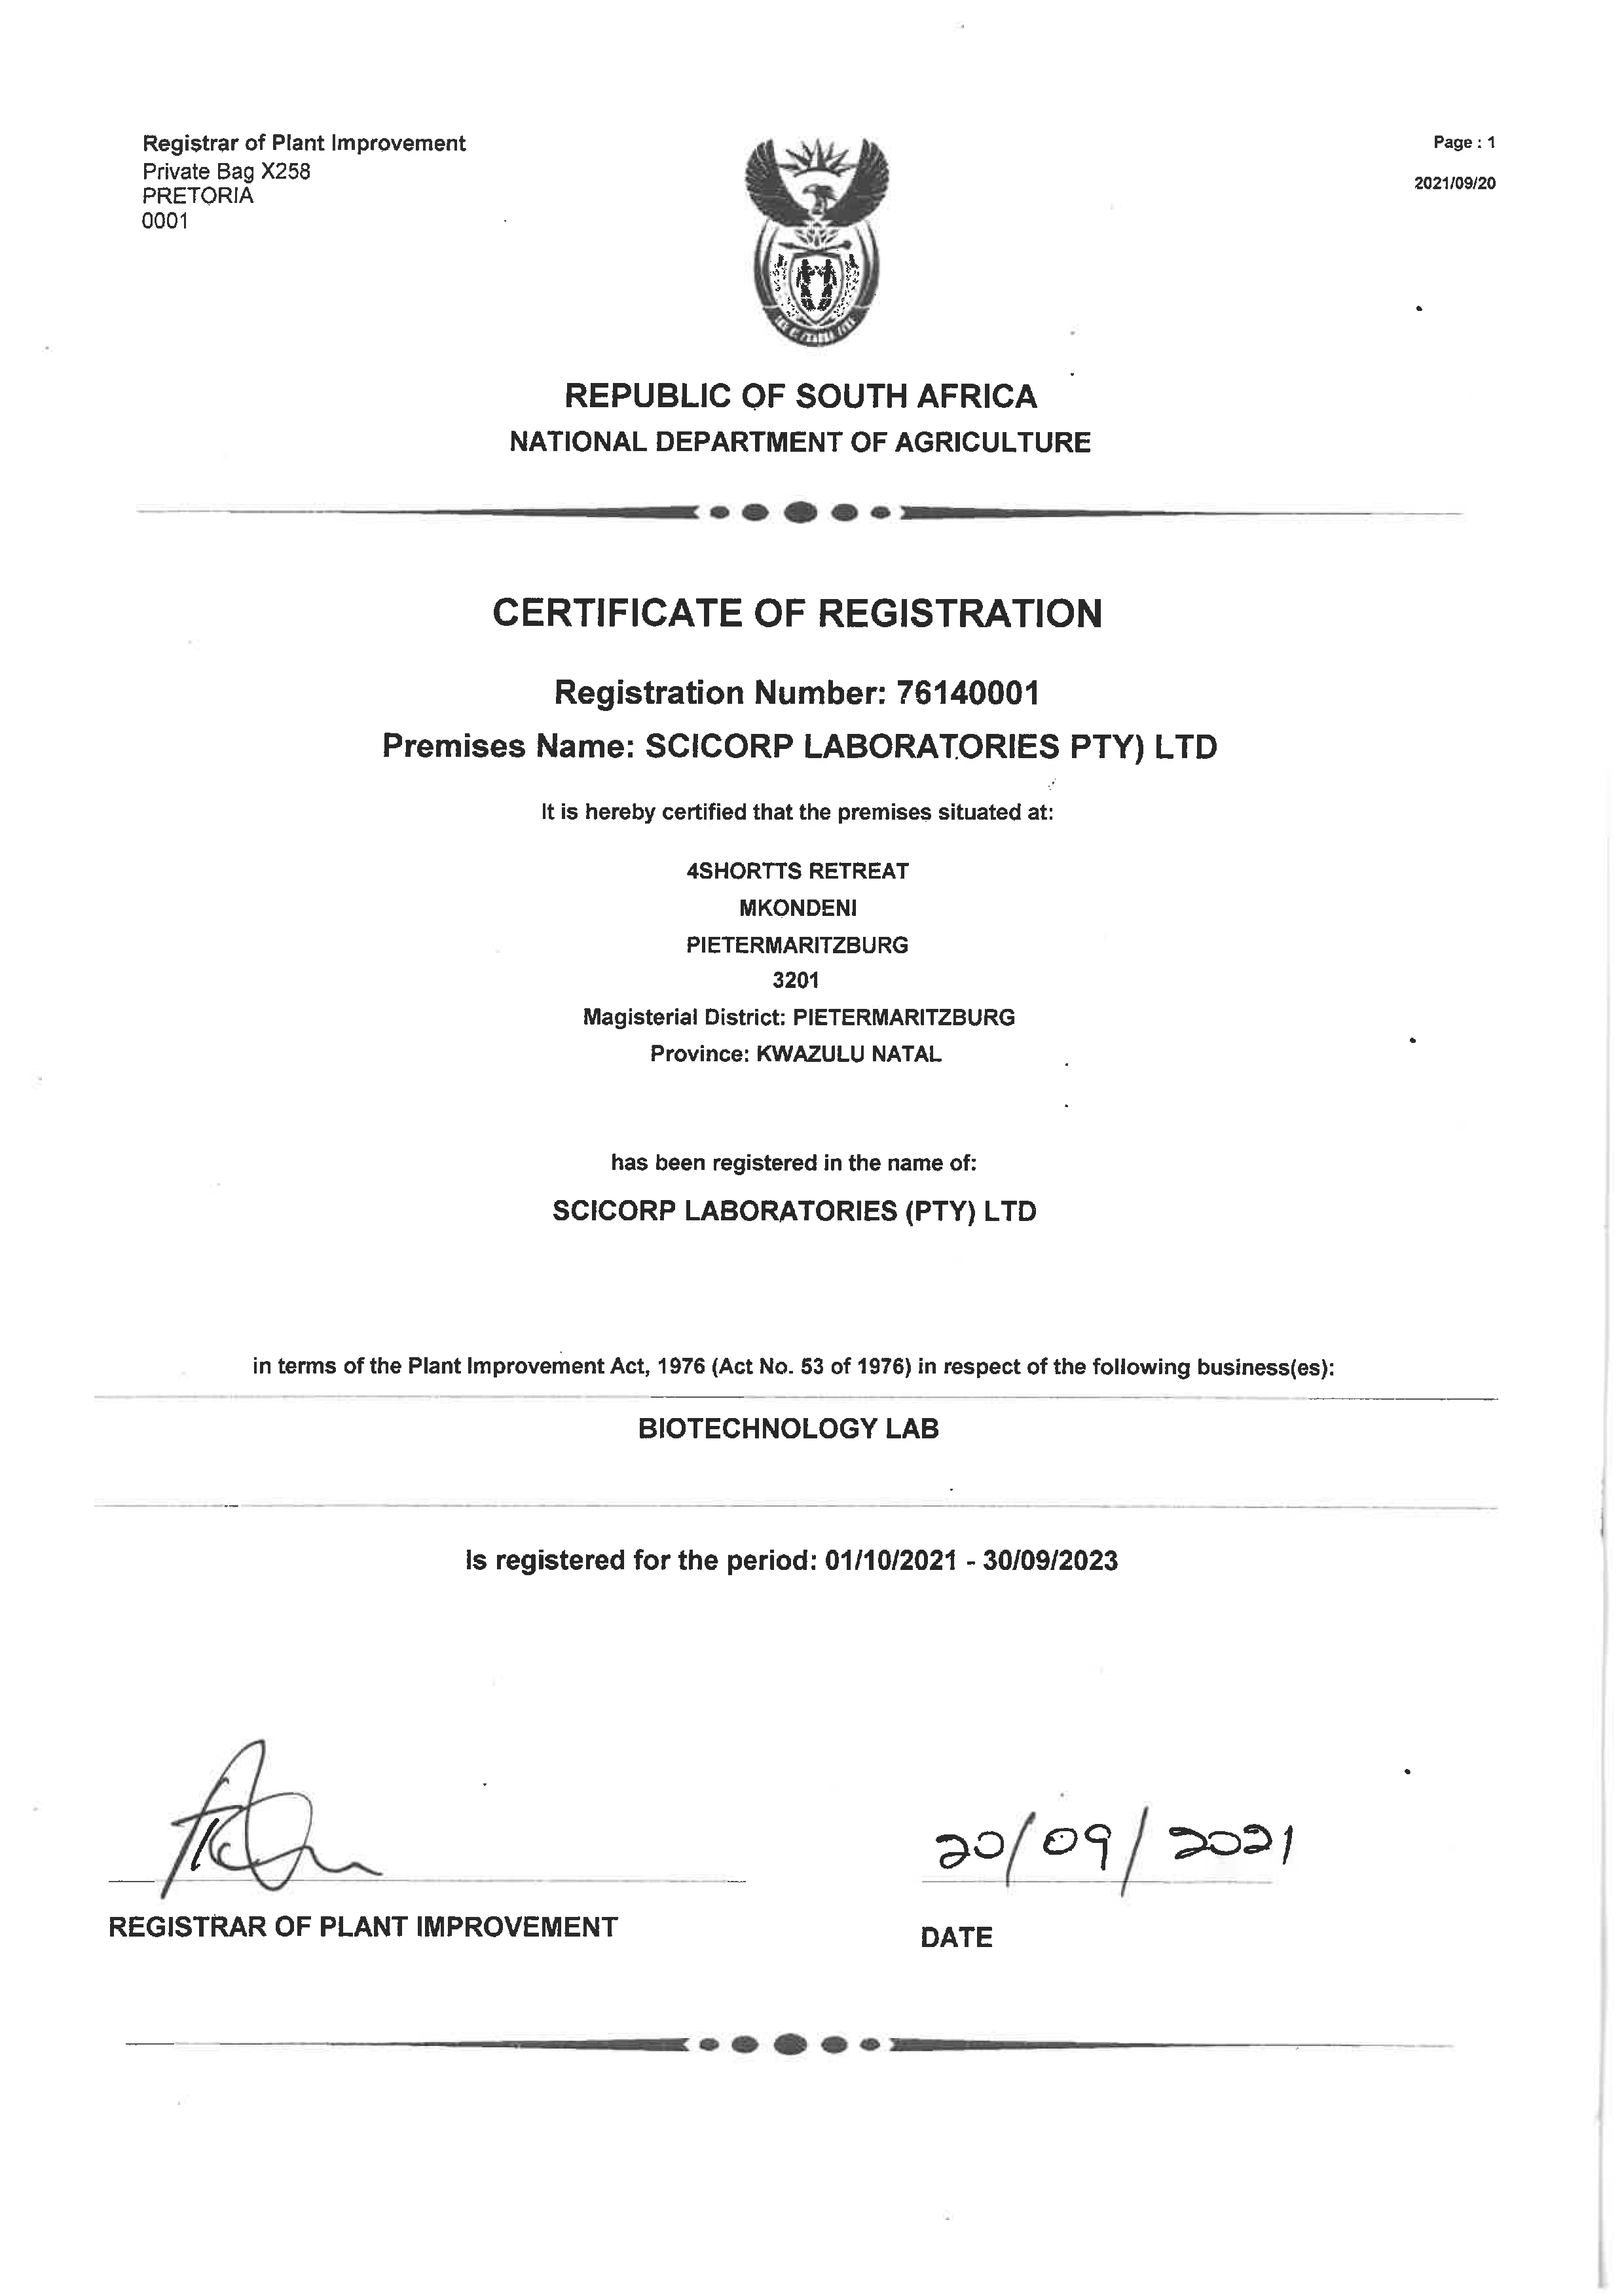 SCICORP LABORATORIES (PTY) LTD_Page_1.png